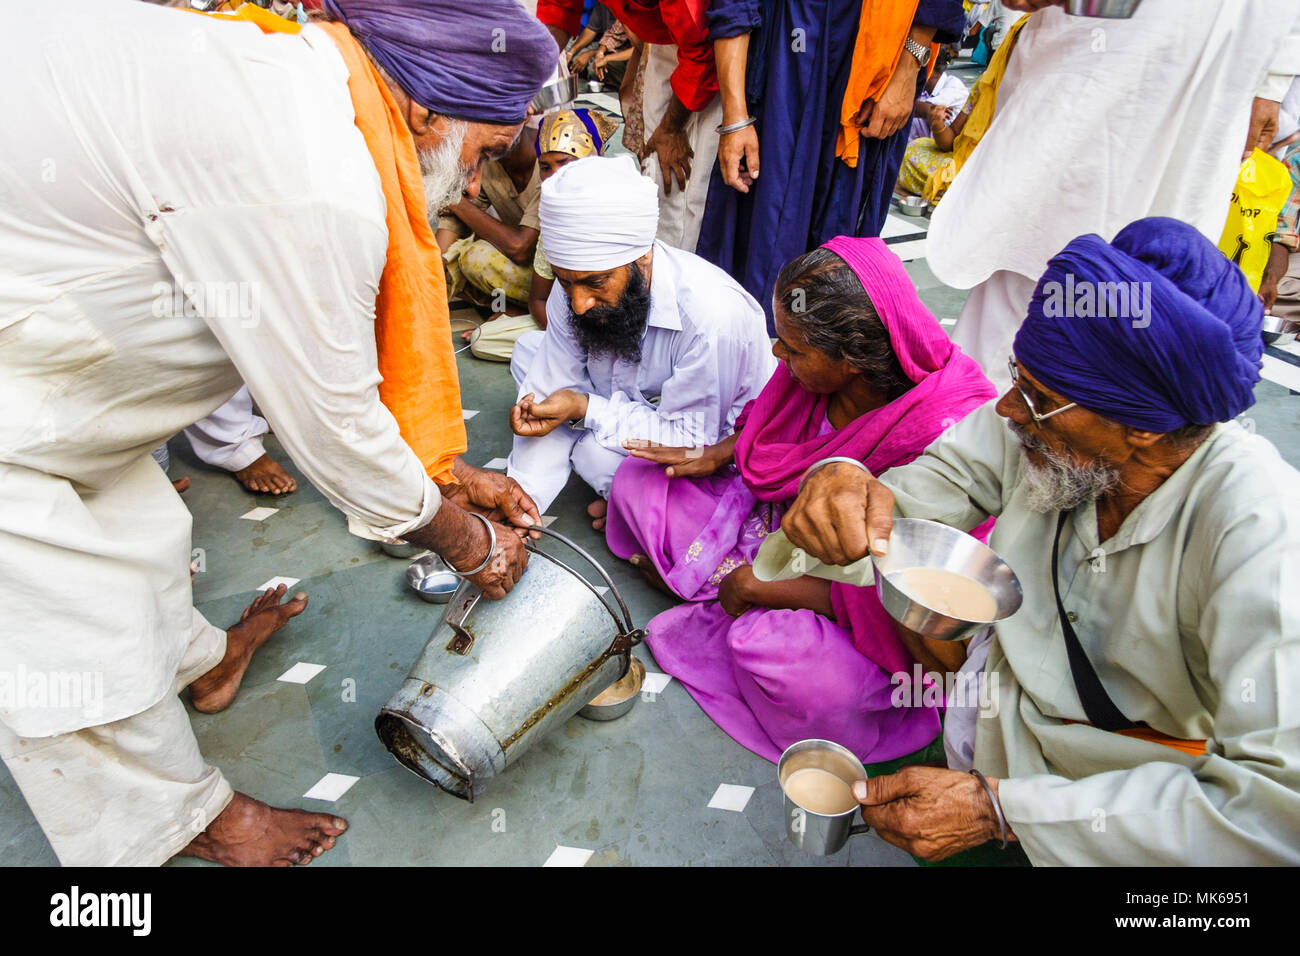 Amritsar, Punjab, India :  A Sikh man offers free tea to the pilgrims at the Guru Ka Langar community kitchen of the Golden Temple where free food for Stock Photo